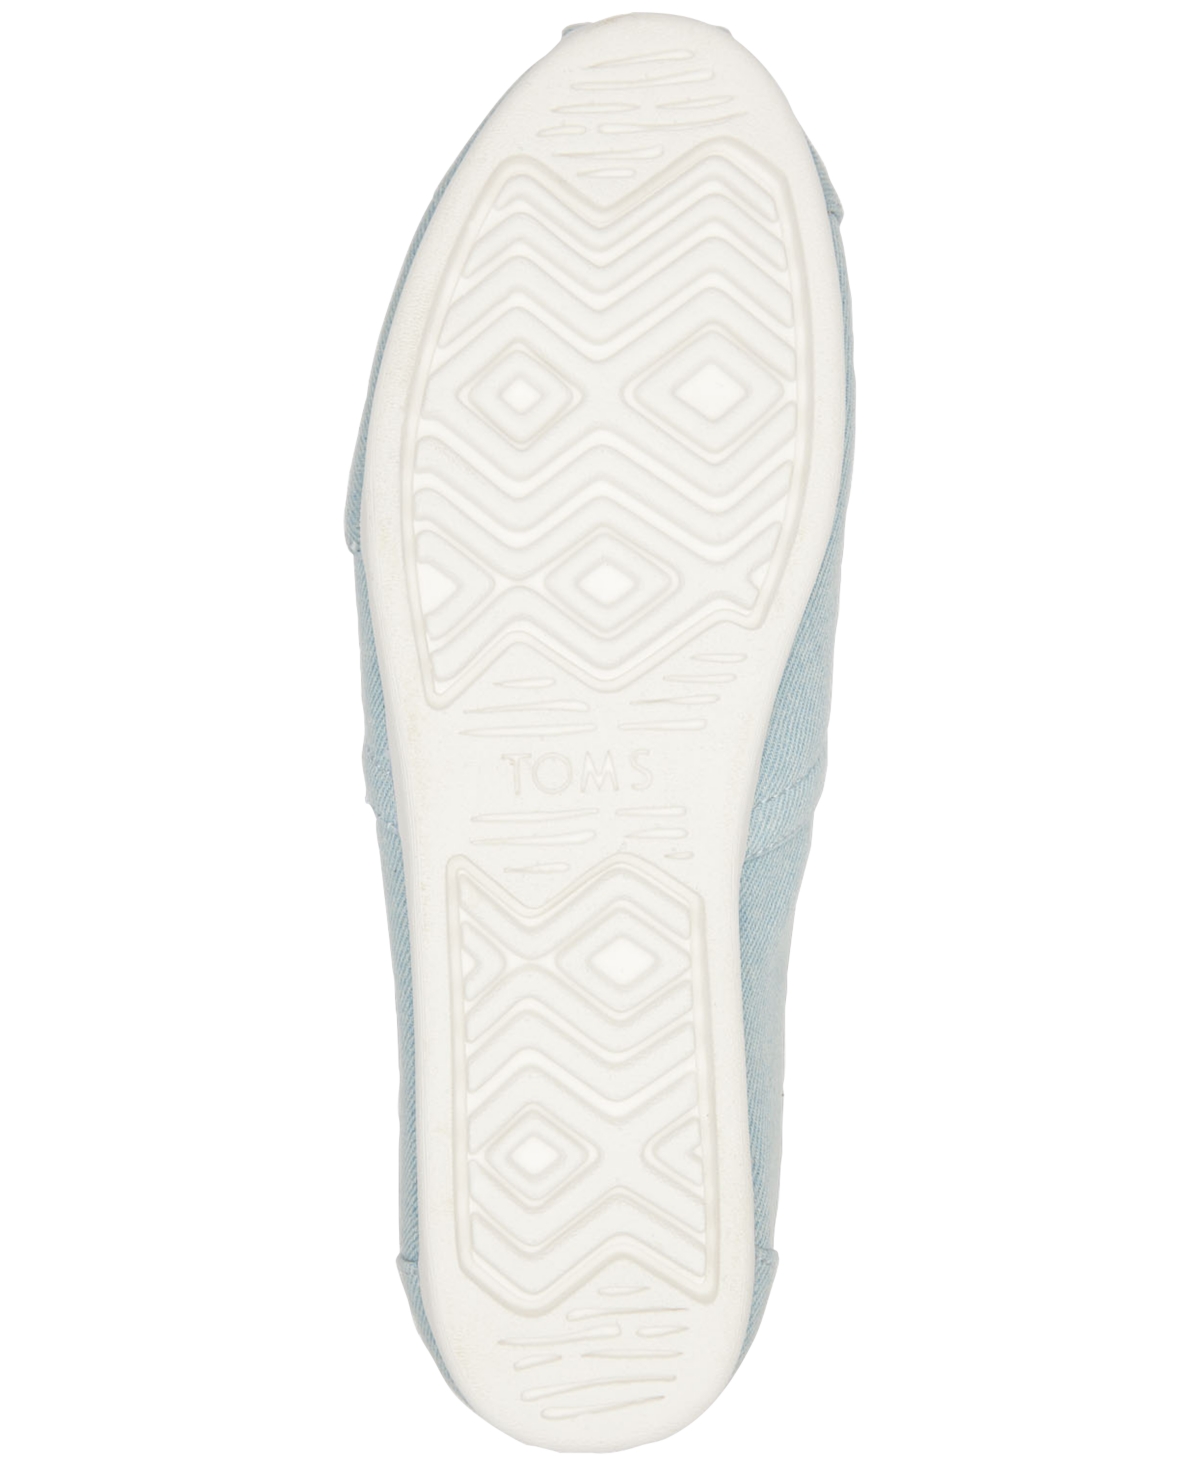 Shop Toms Women's Alpargata Cloudbound Recycled Slip-on Flats In Natural Basket Weave Lace